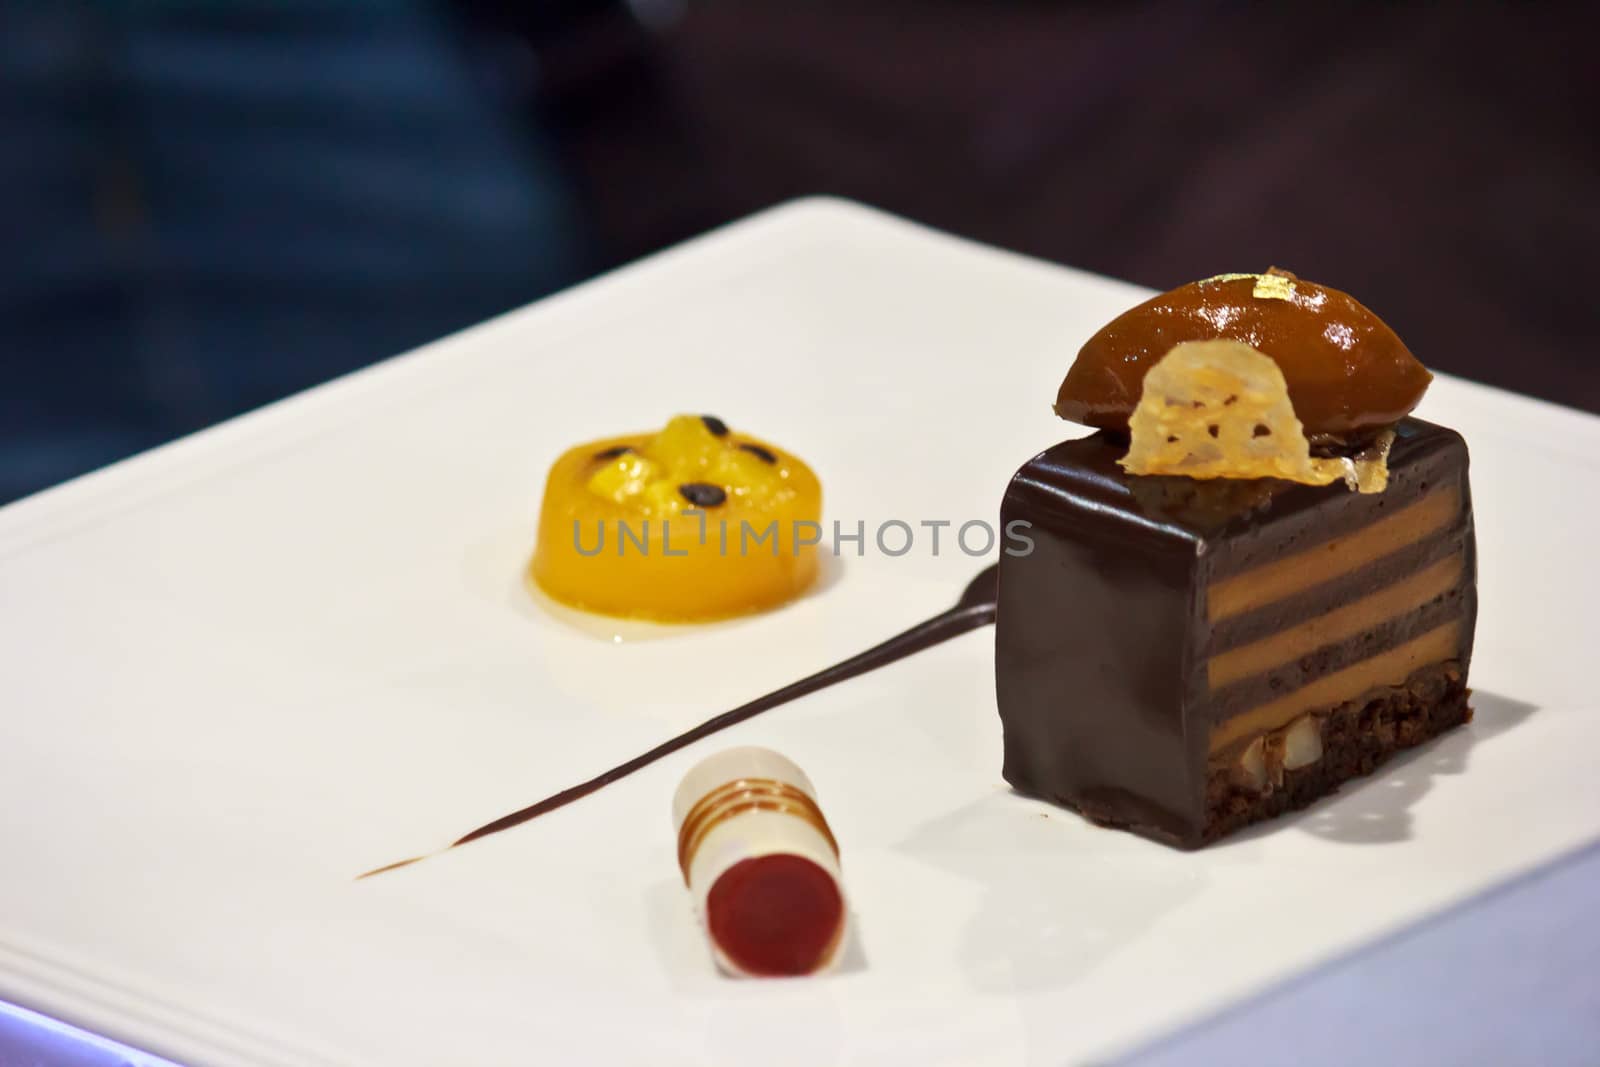 mini chocolate cake in The Thailand Ultimate Chef Challenge 2013